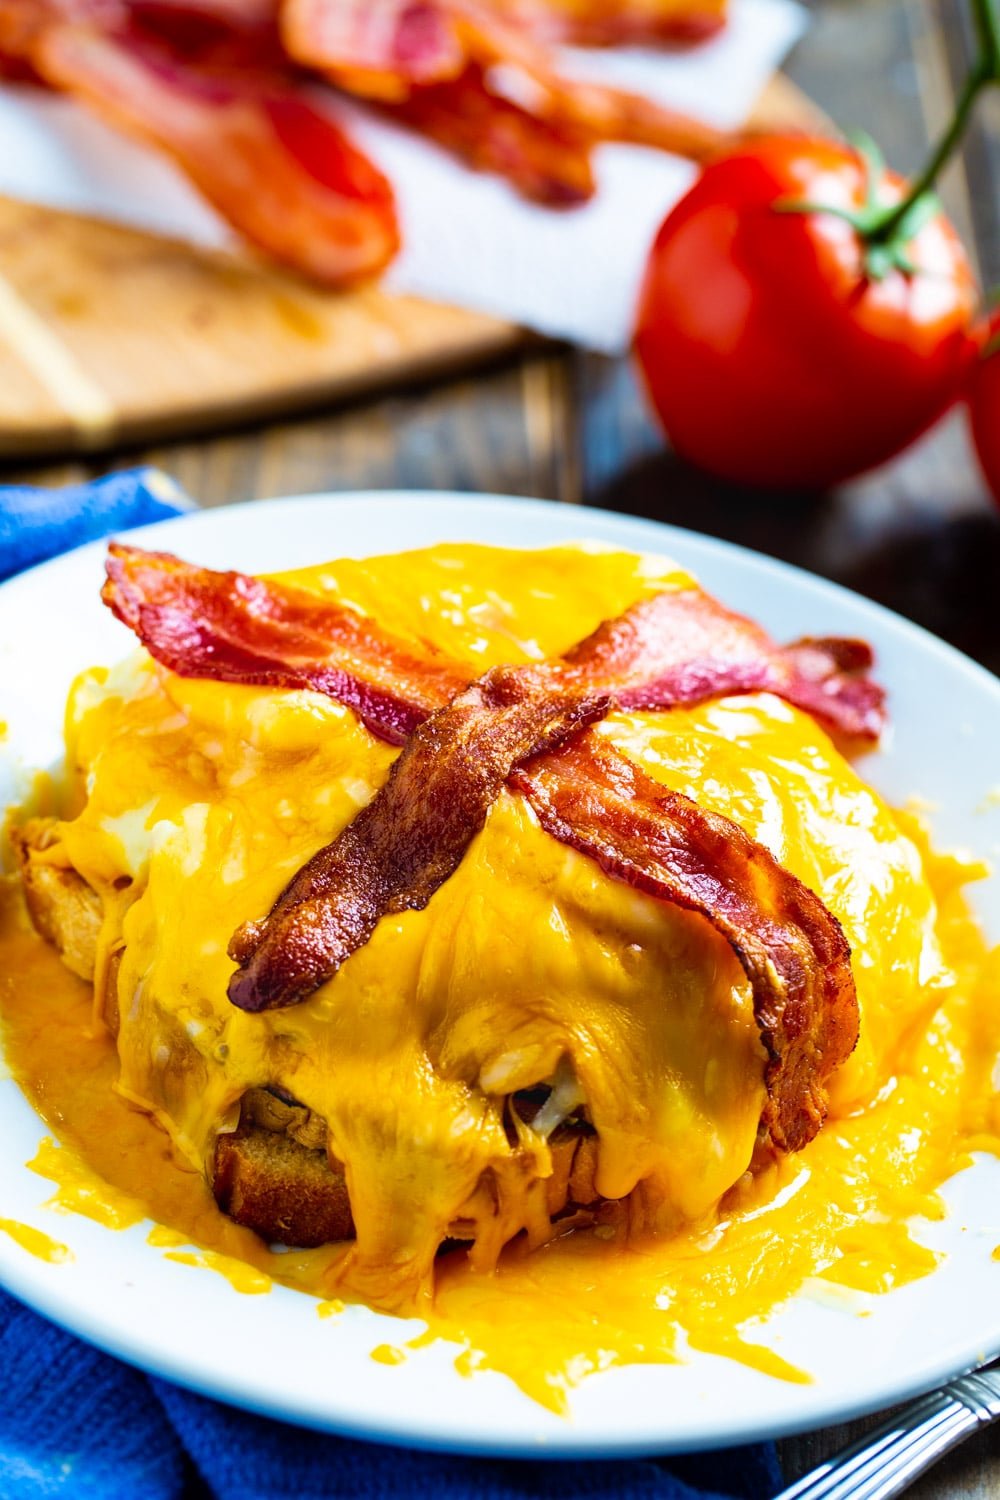 Hot Brown Sandwich on a plate with bacon and tomatoes in background.